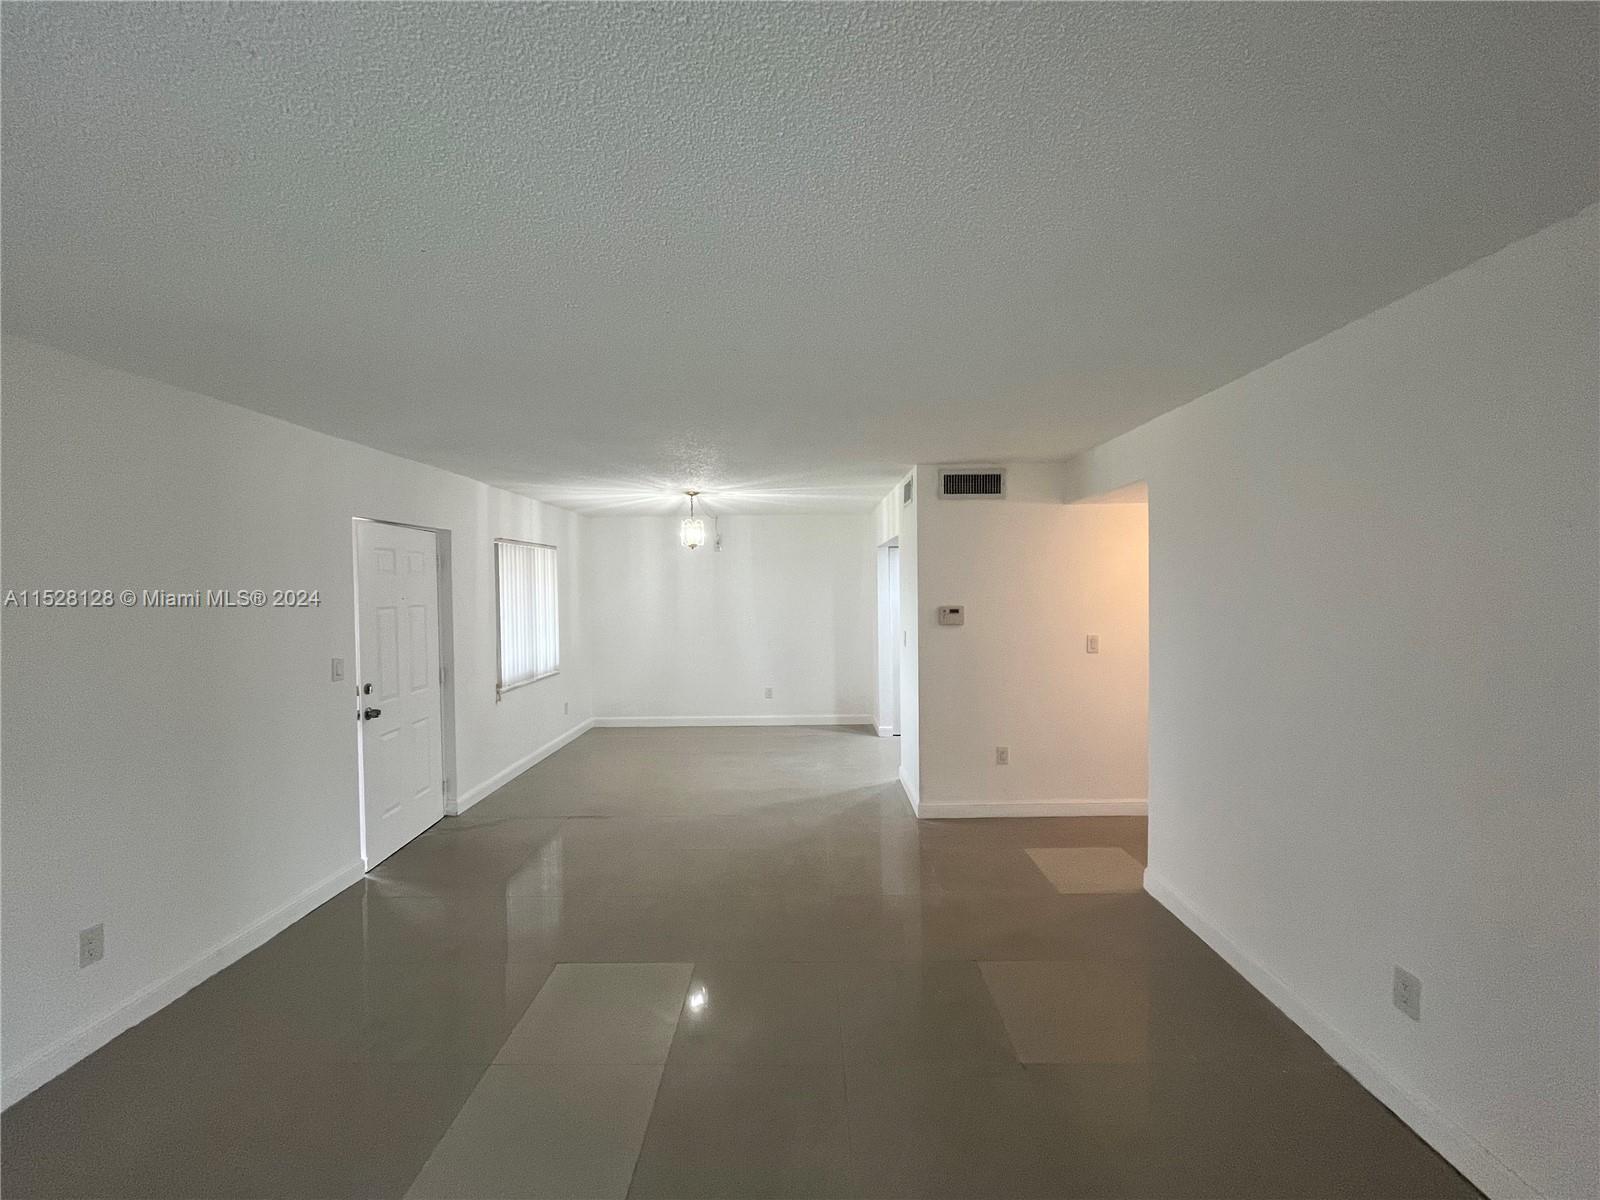 Photo of 1930 NW 119th St #702 in Miami, FL